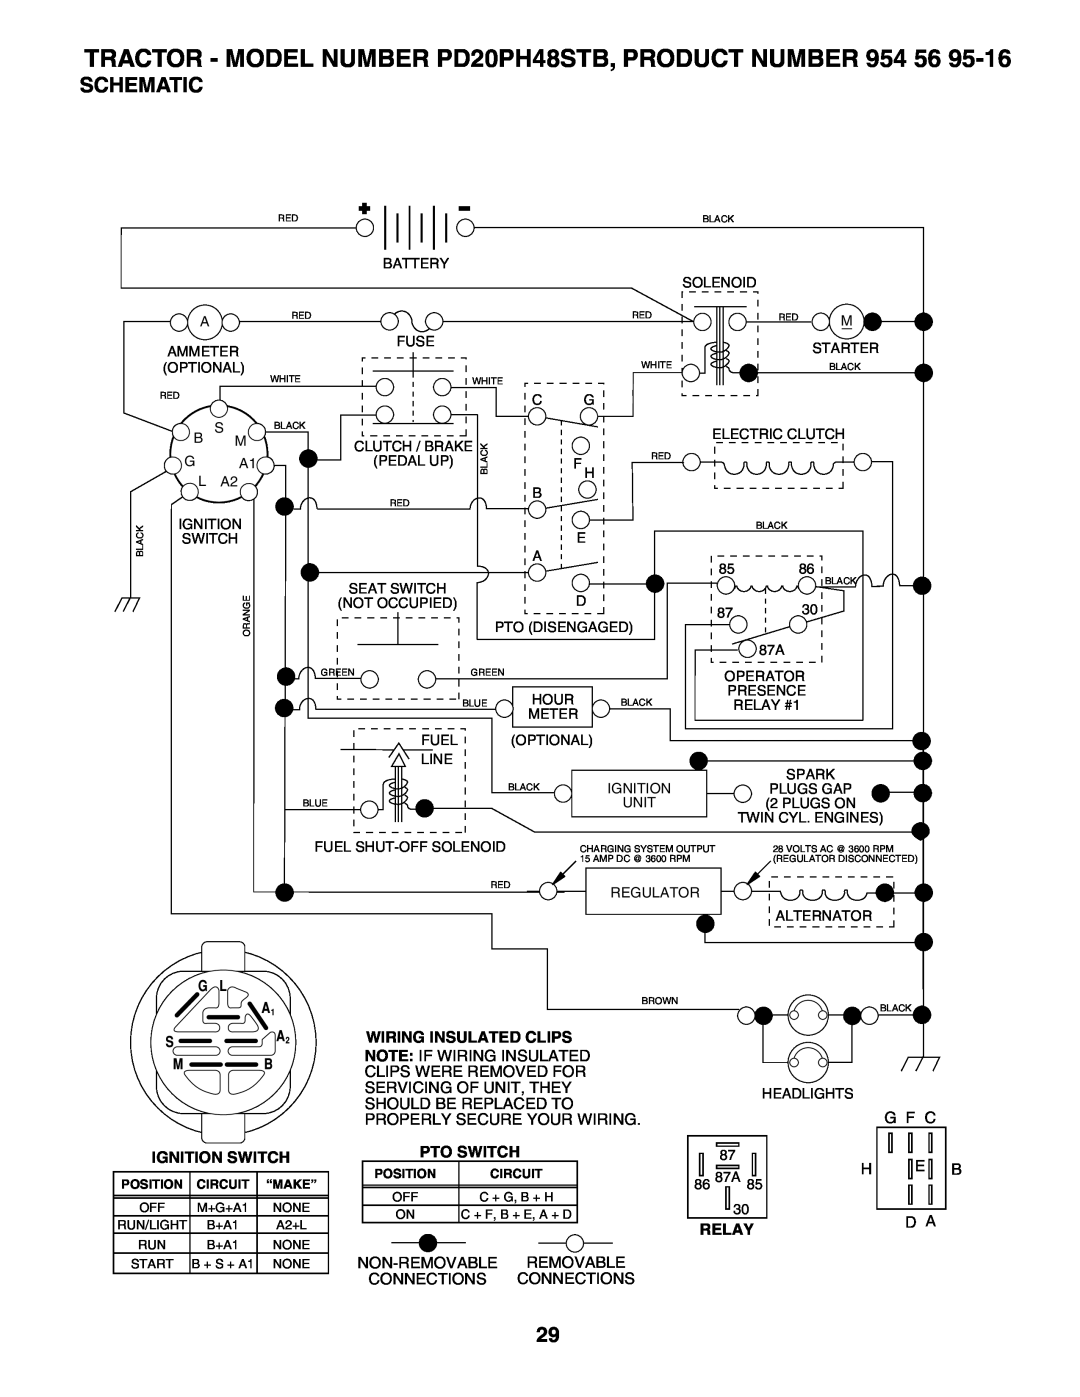 Poulan TRACTOR - MODEL NUMBER PD20PH48STB, PRODUCT NUMBER 954 56, Schematic, Ignition Switch, Wiring Insulated Clips 